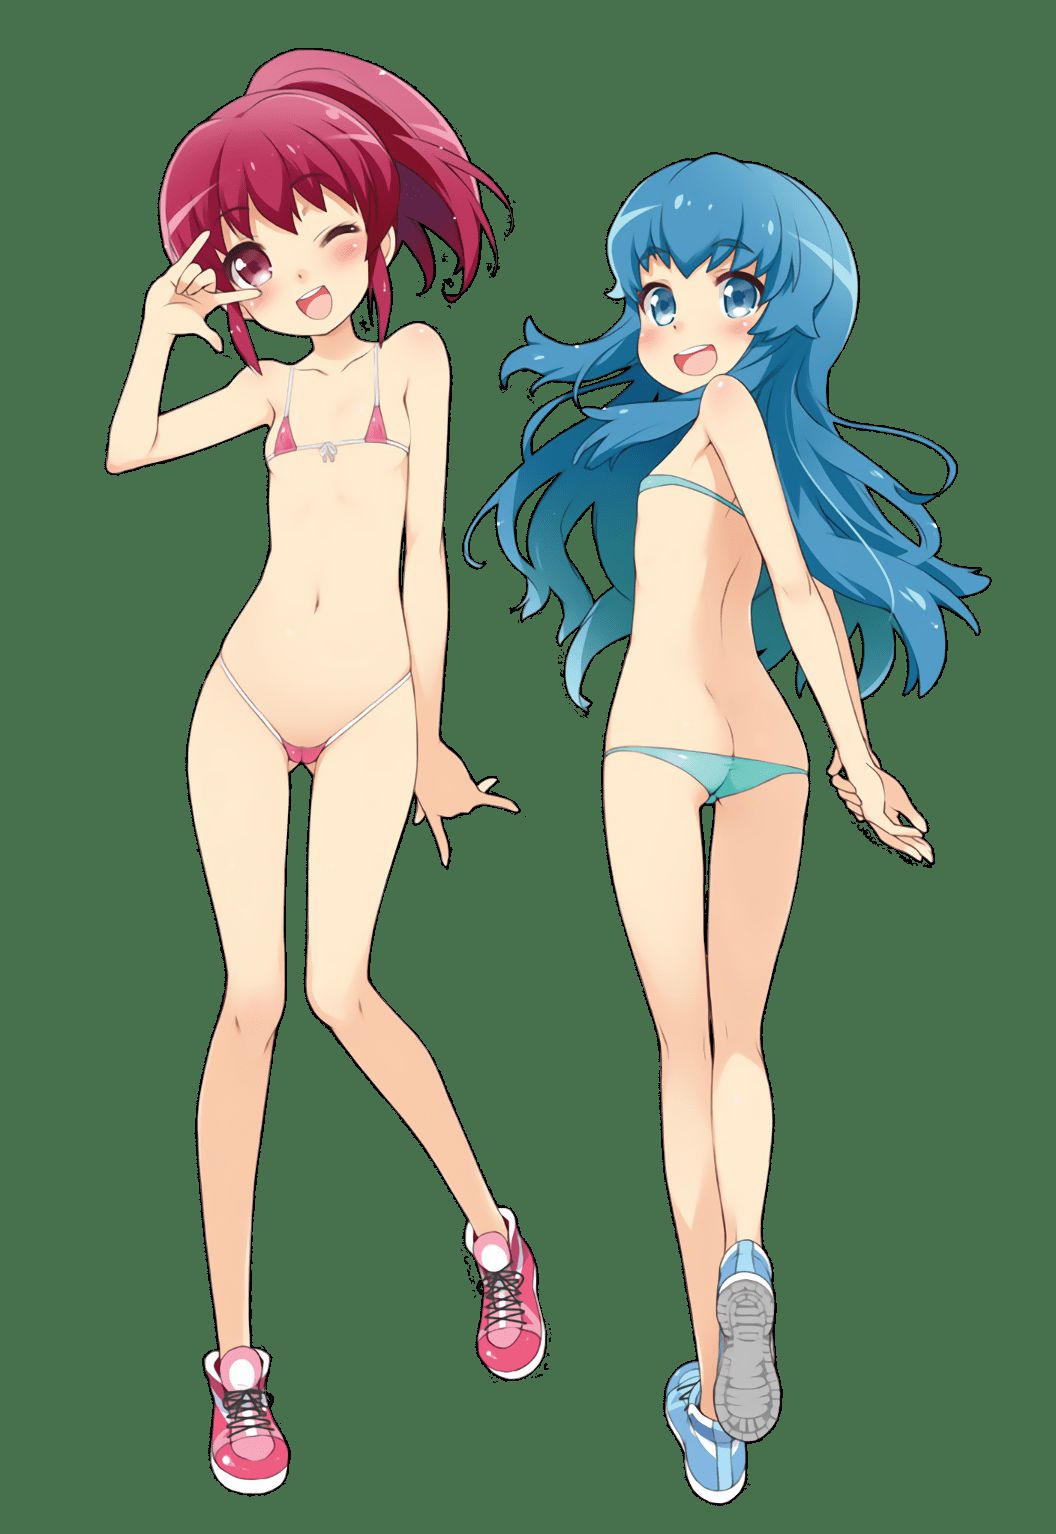 [Anime character material] png background of animated characters erotic images that 118 29